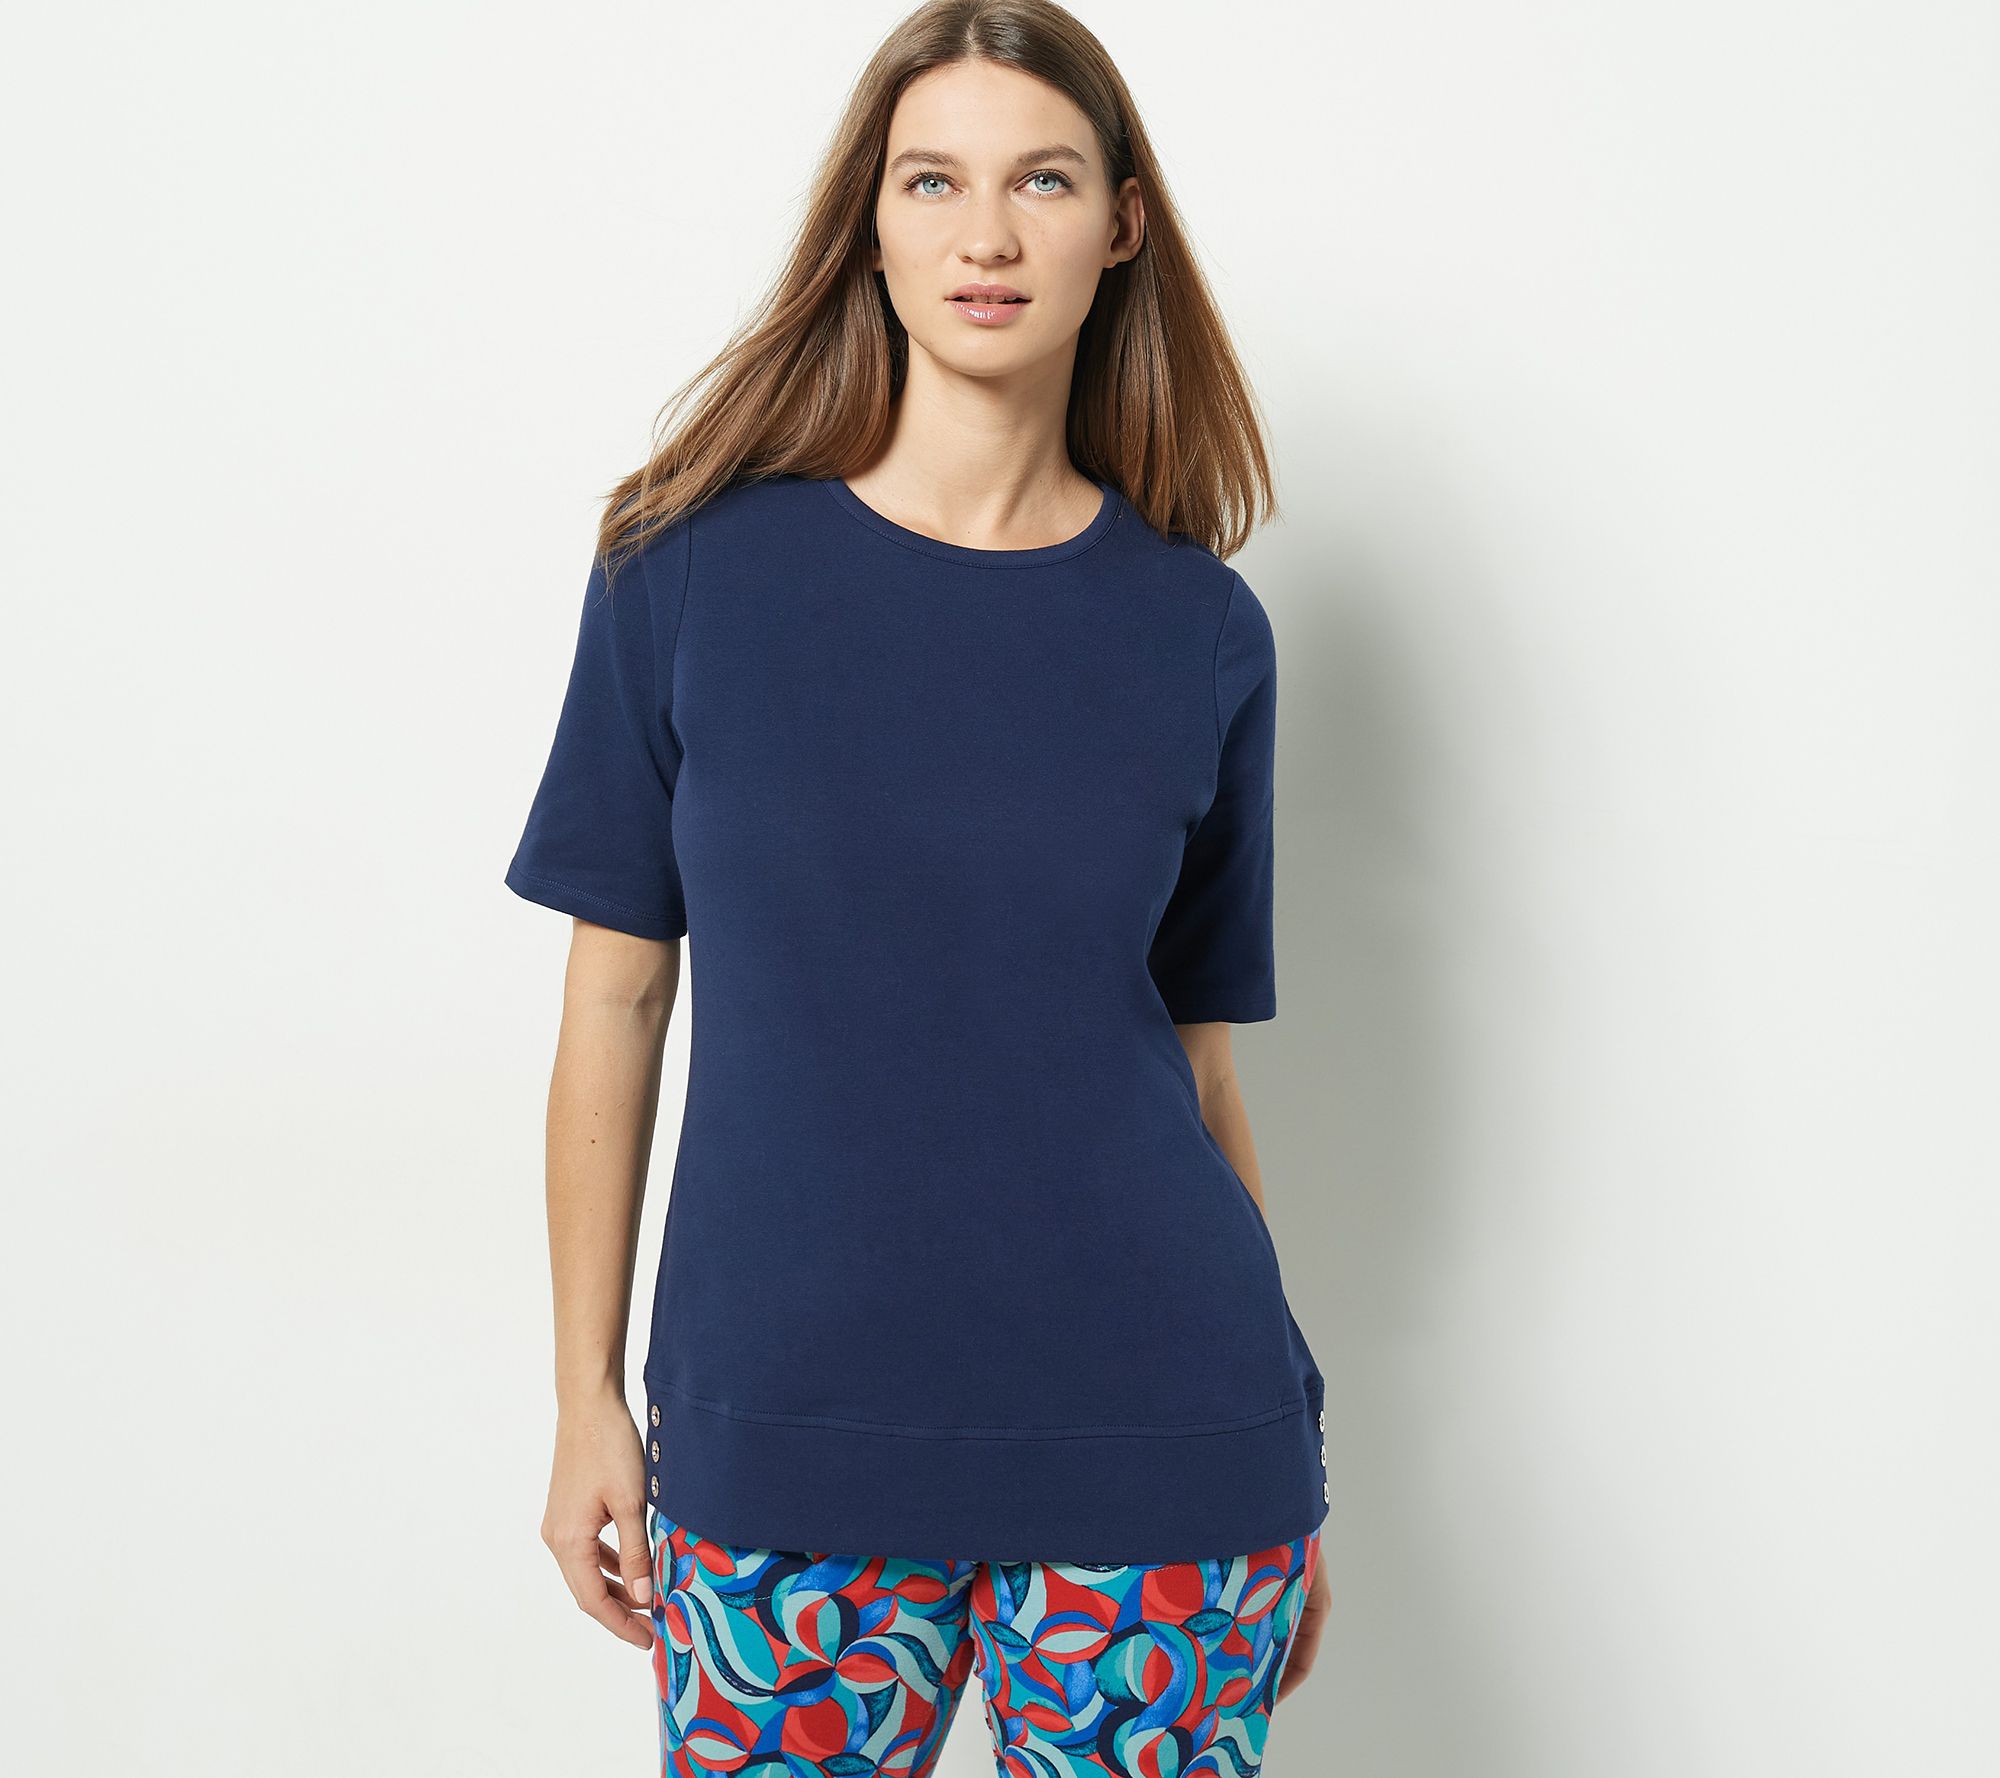 Sport Savvy French Terry Scoop Neck Short Sleeve Tunic 